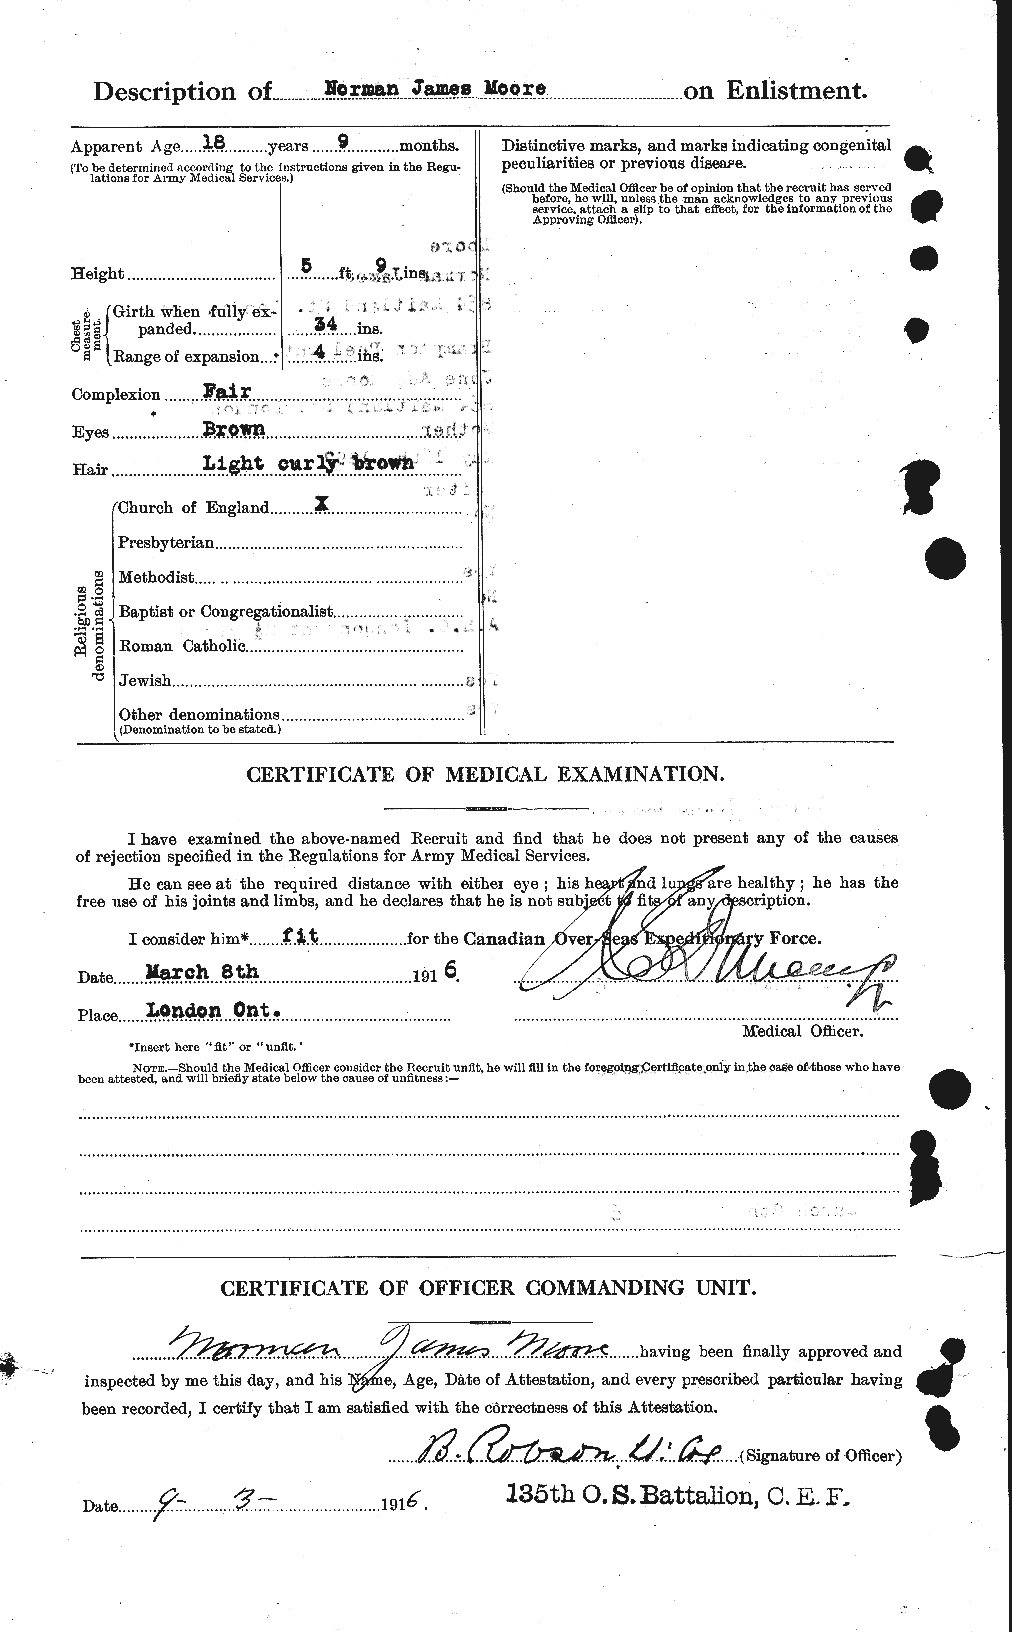 Personnel Records of the First World War - CEF 503464b